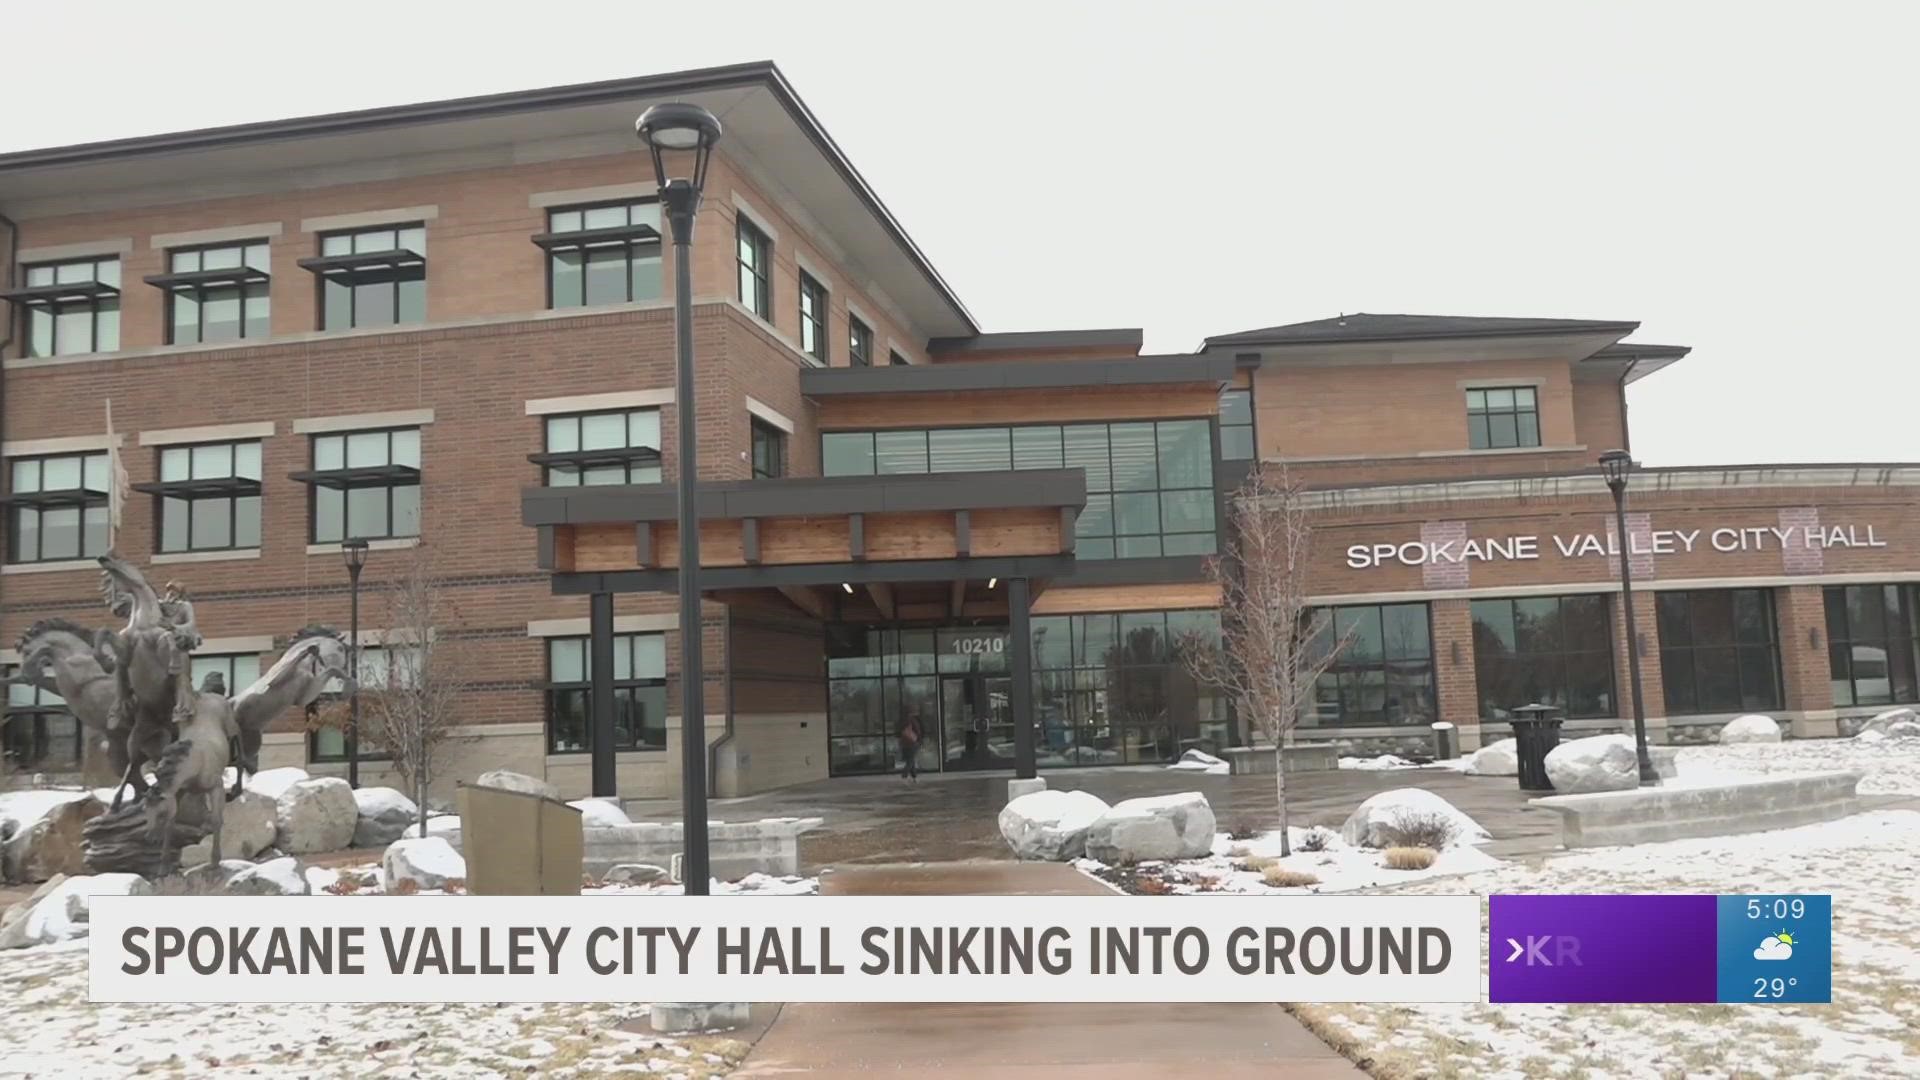 Cracks started to form inside Spokane Valley City Hall only a year after it was completed in 2017.